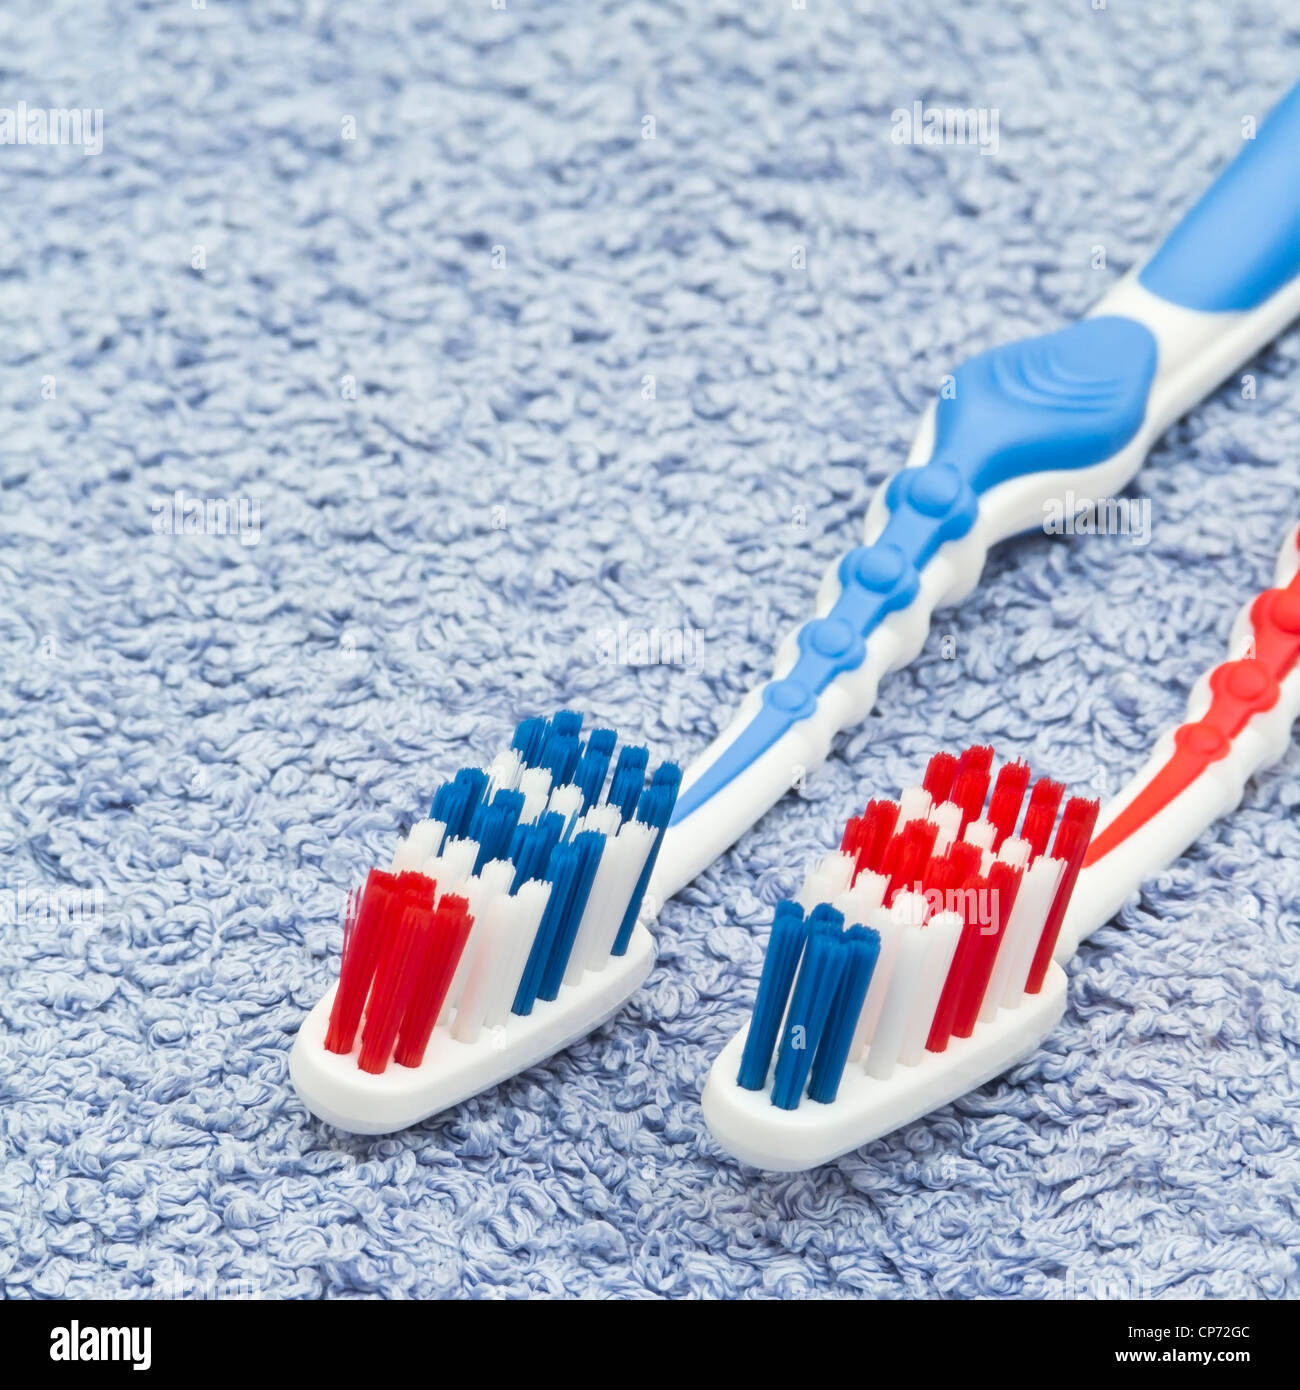 Pair of Toothbrushes on Towel Stock Photo